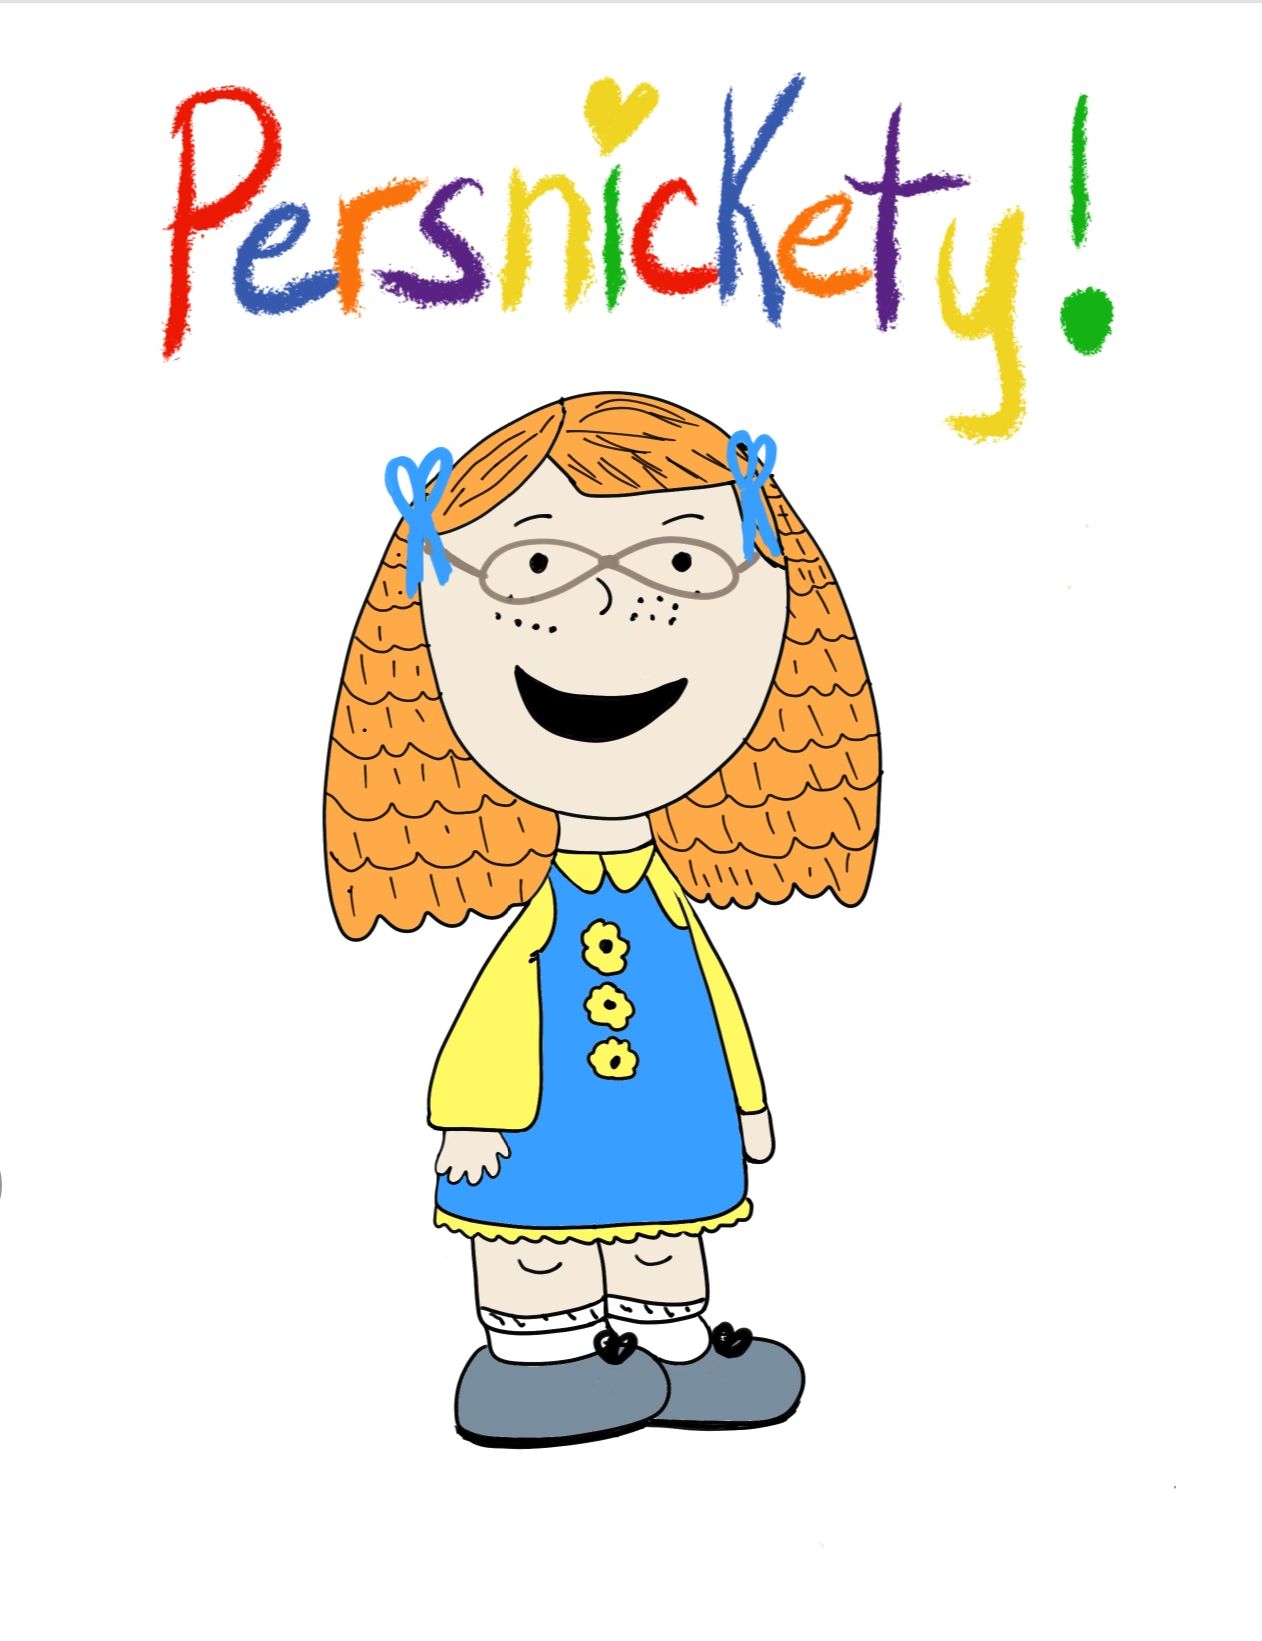 Welcome to Persnickety's page